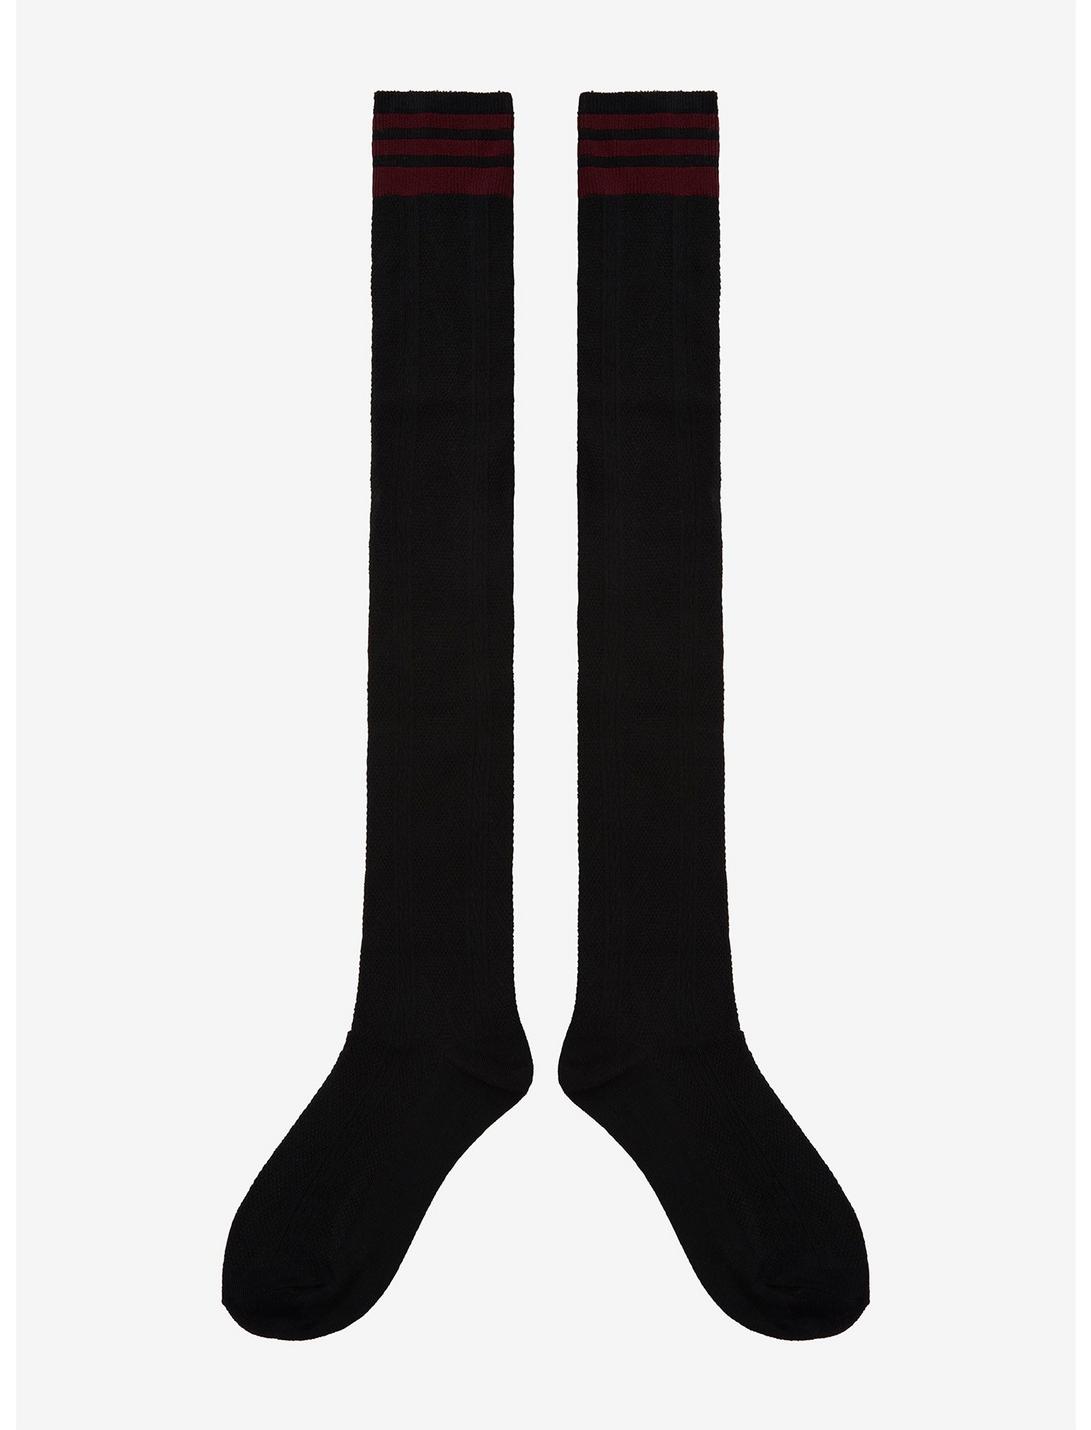 Black & Maroon Cable Pattern Over-The-Knee Socks, , hi-res